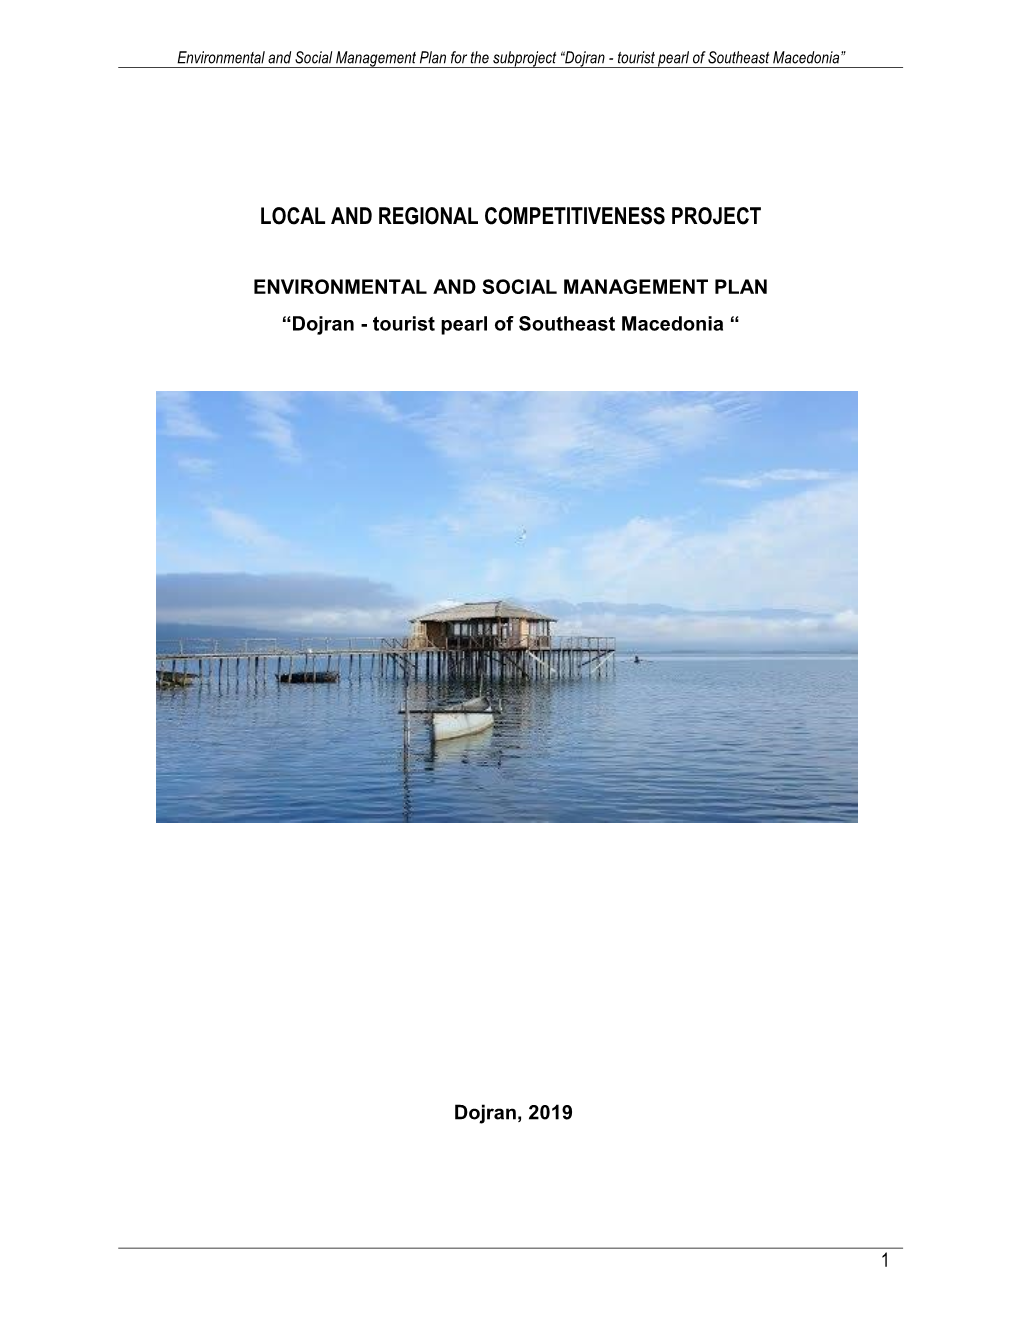 Local and Regional Competitiveness Project